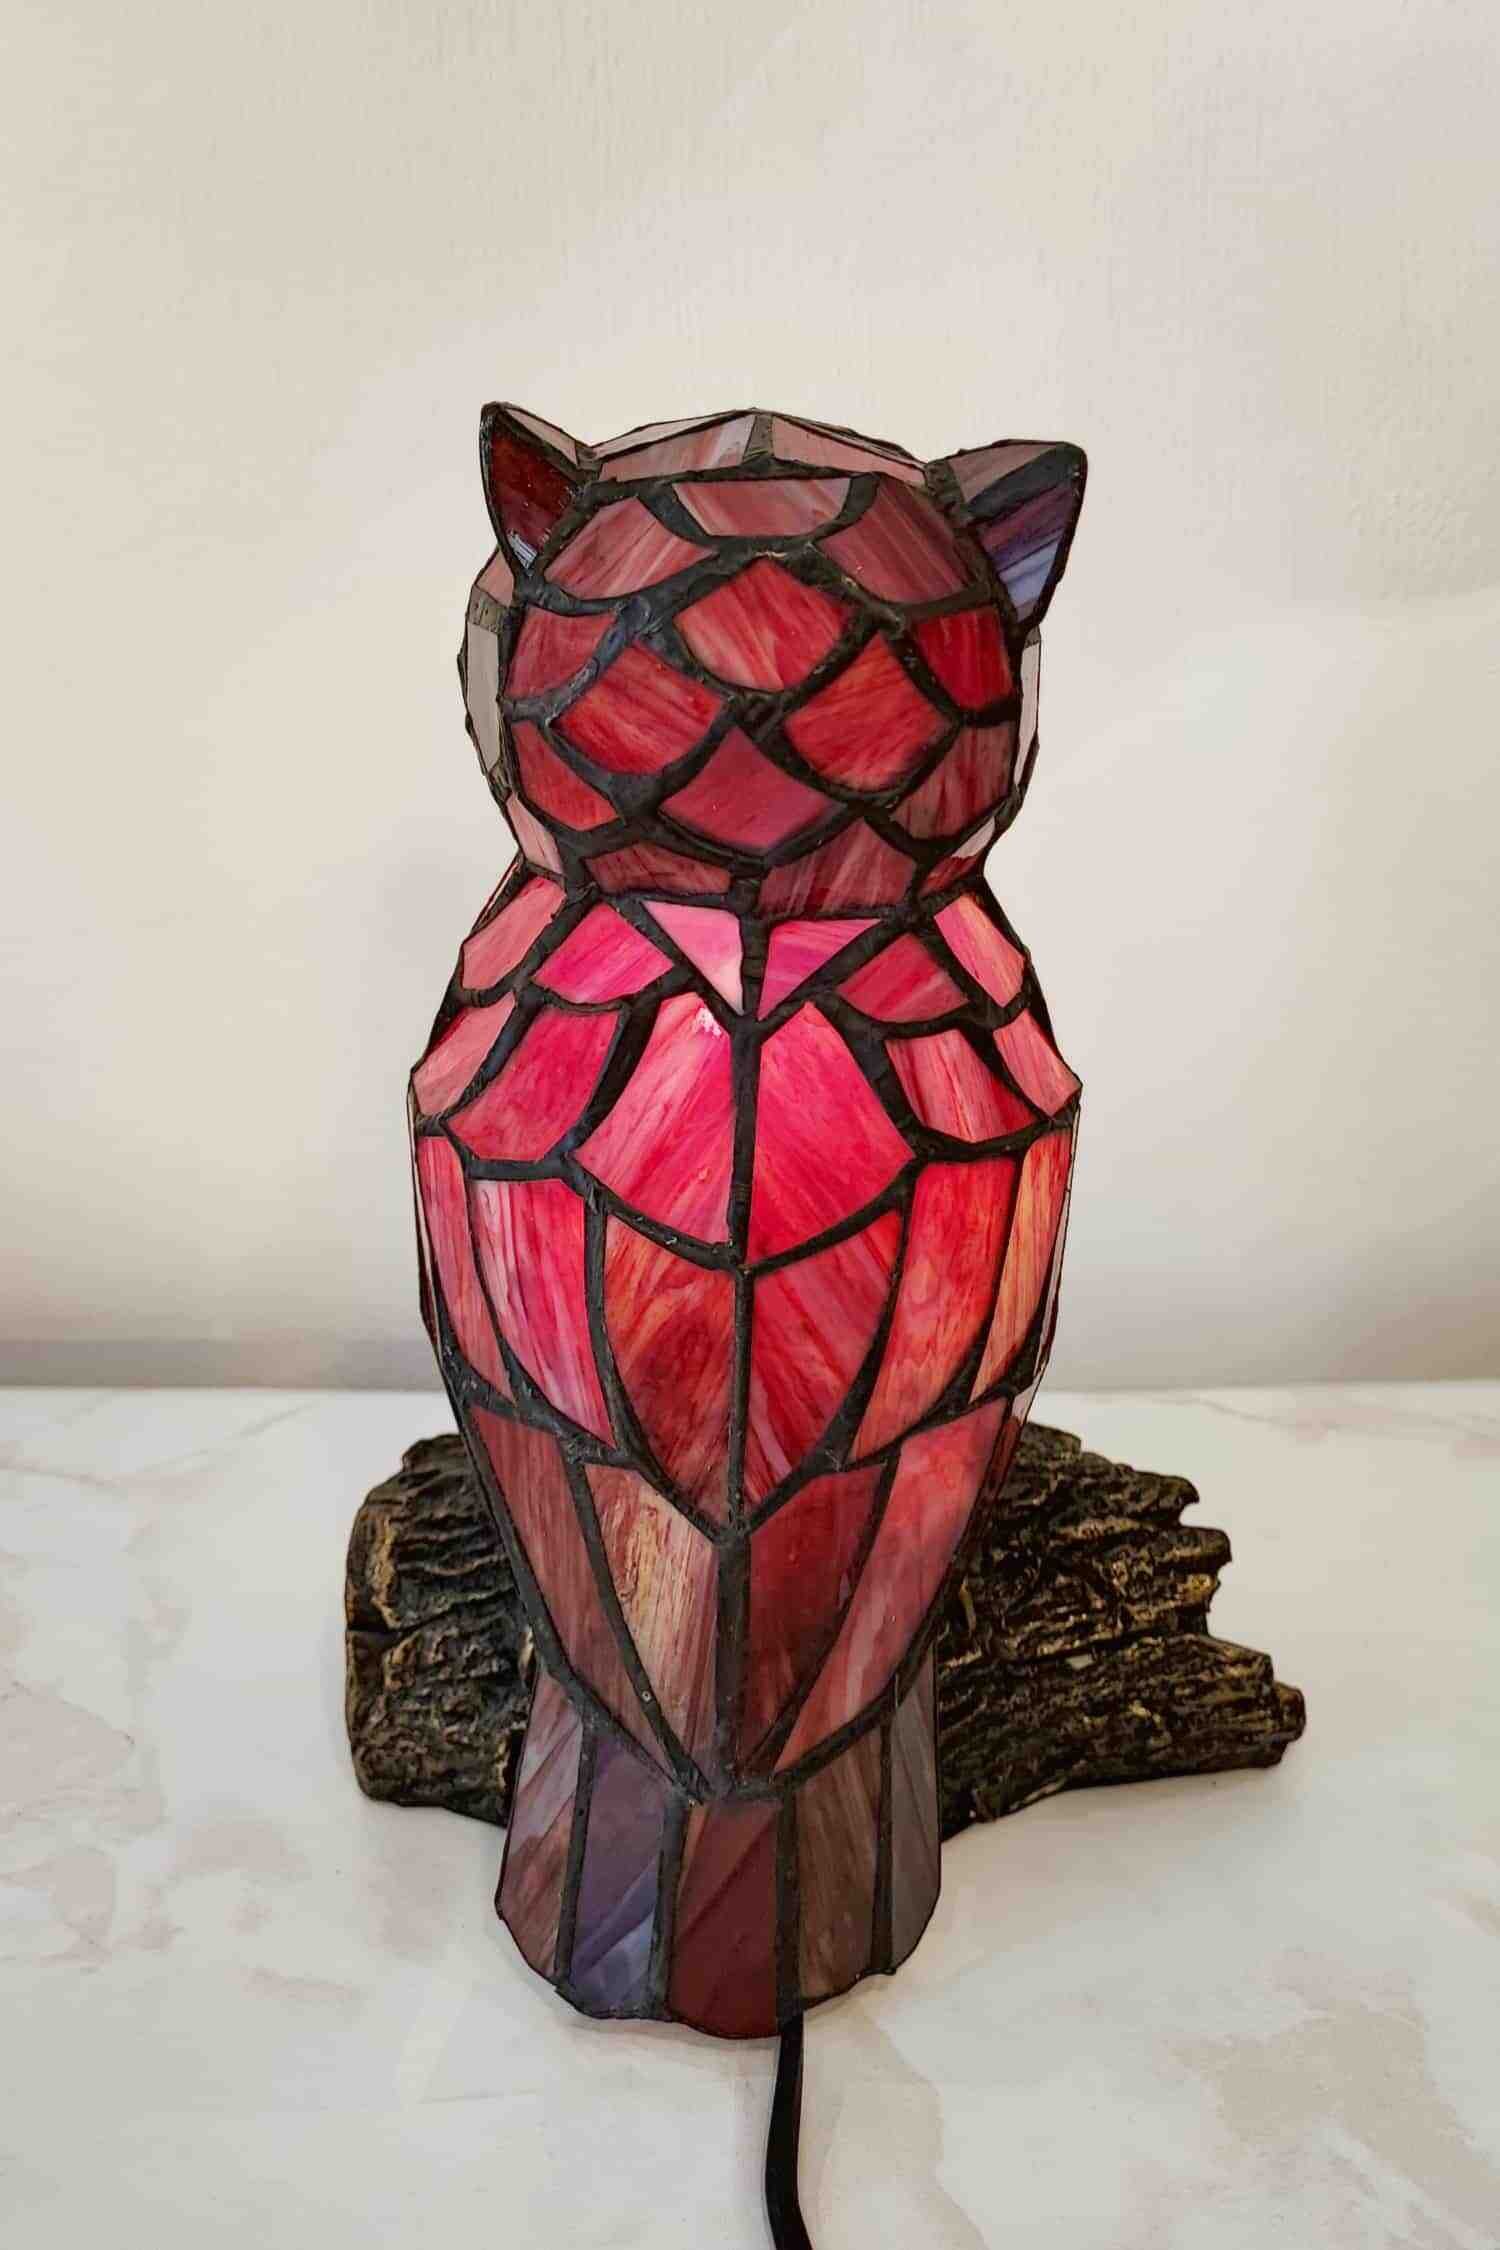 Tiffany Owl Lamp: the Perfect Owl Lamp for Collectors or for a Special Gift